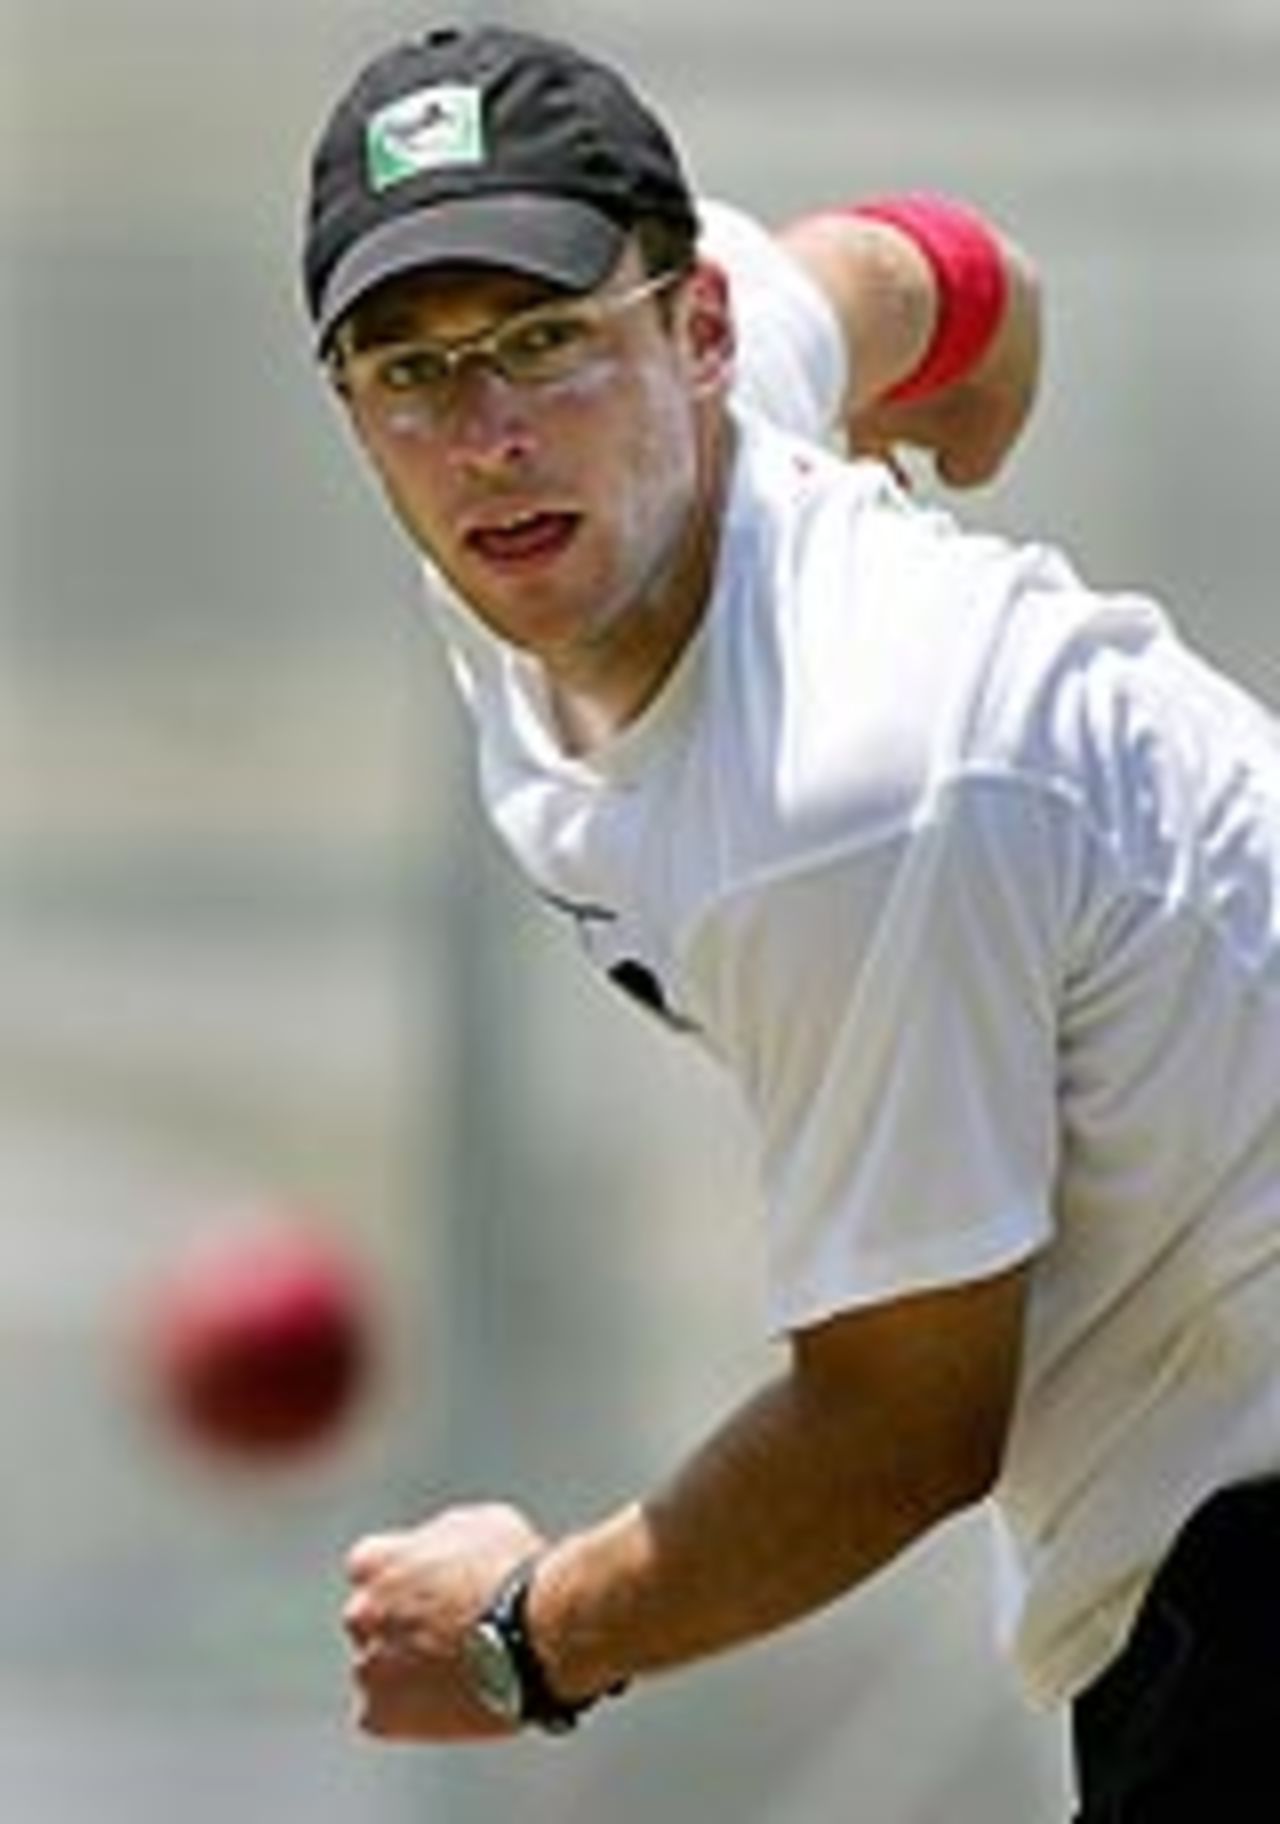 Daniel Vettori bowls in the nets ahead of the first Test at Brisbane, November 18, 2004